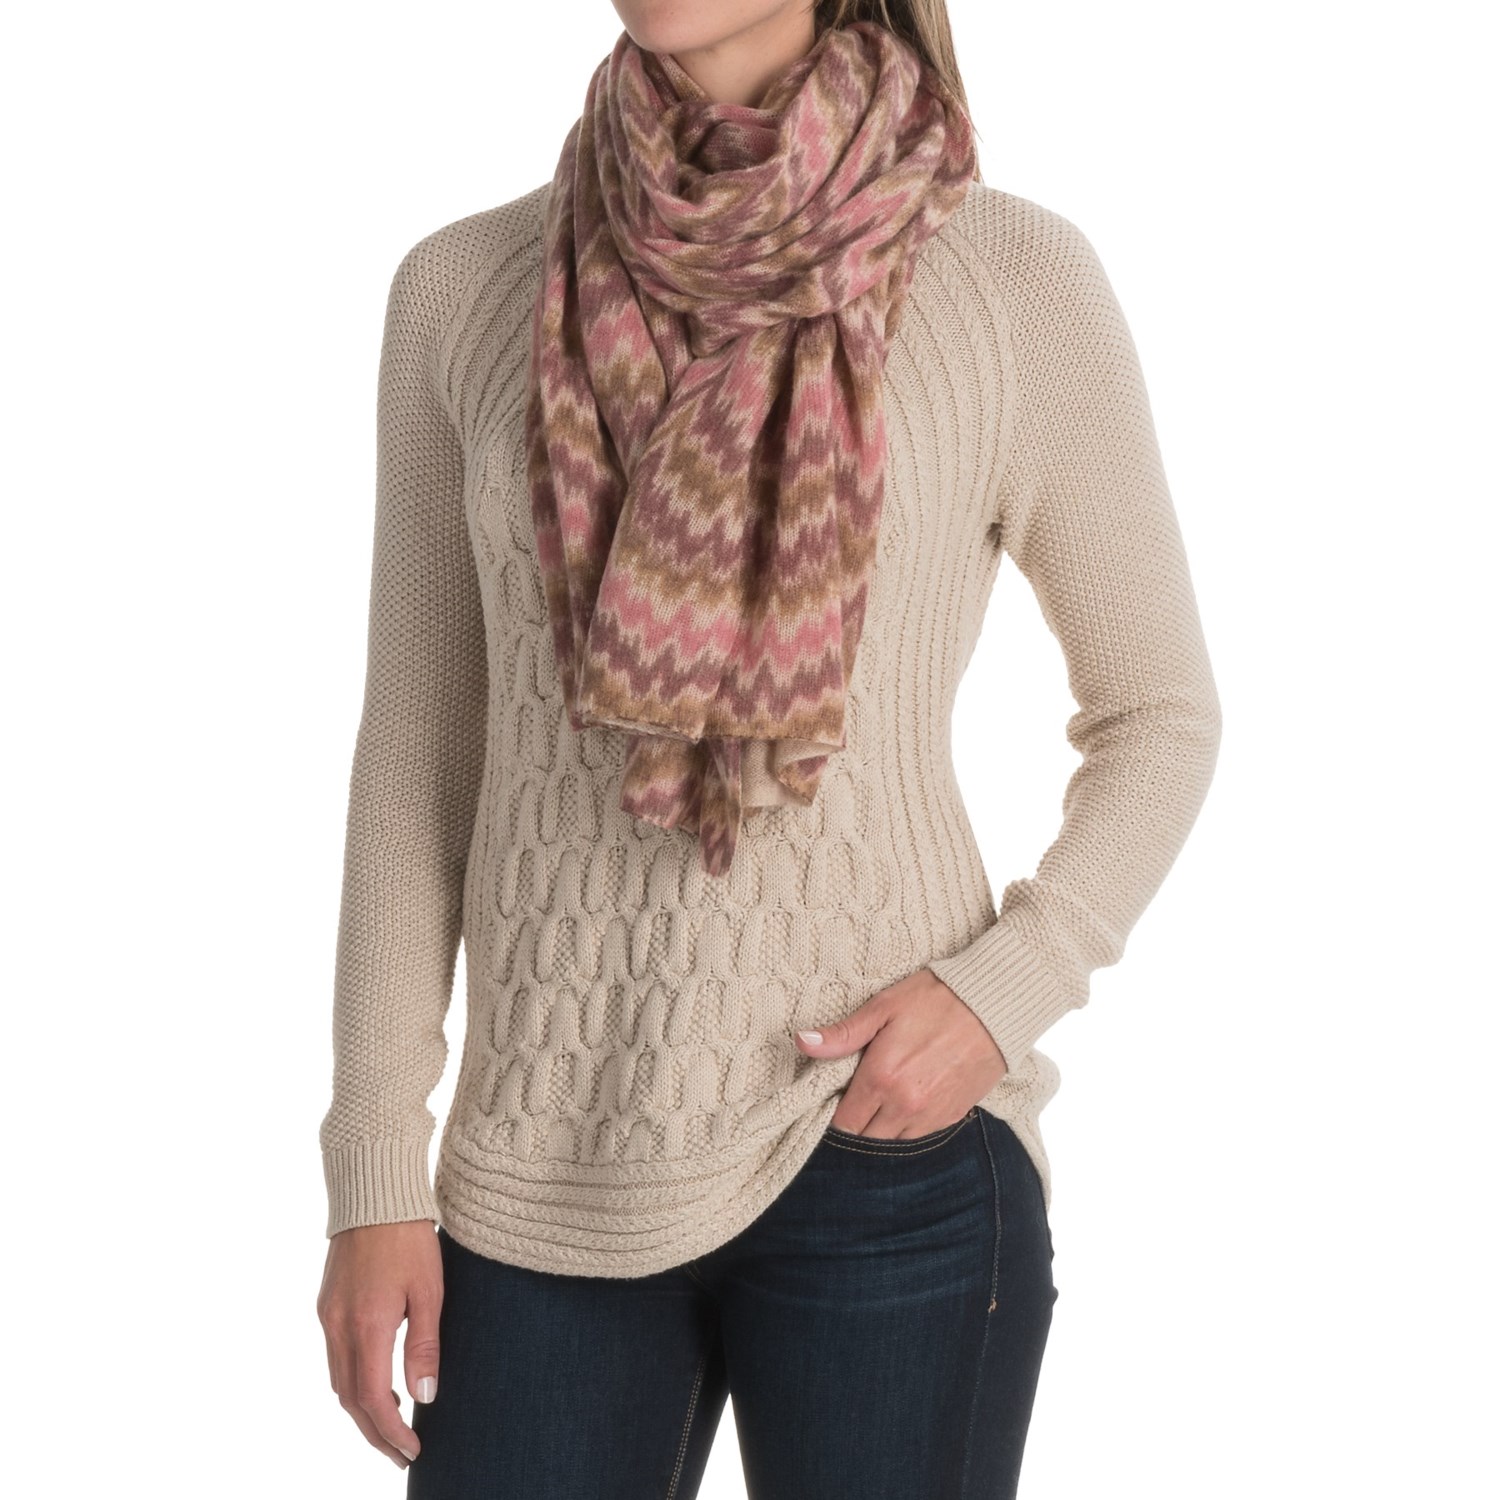 La Fiorentina Wool and Cashmere Blend Wrap (For Women)